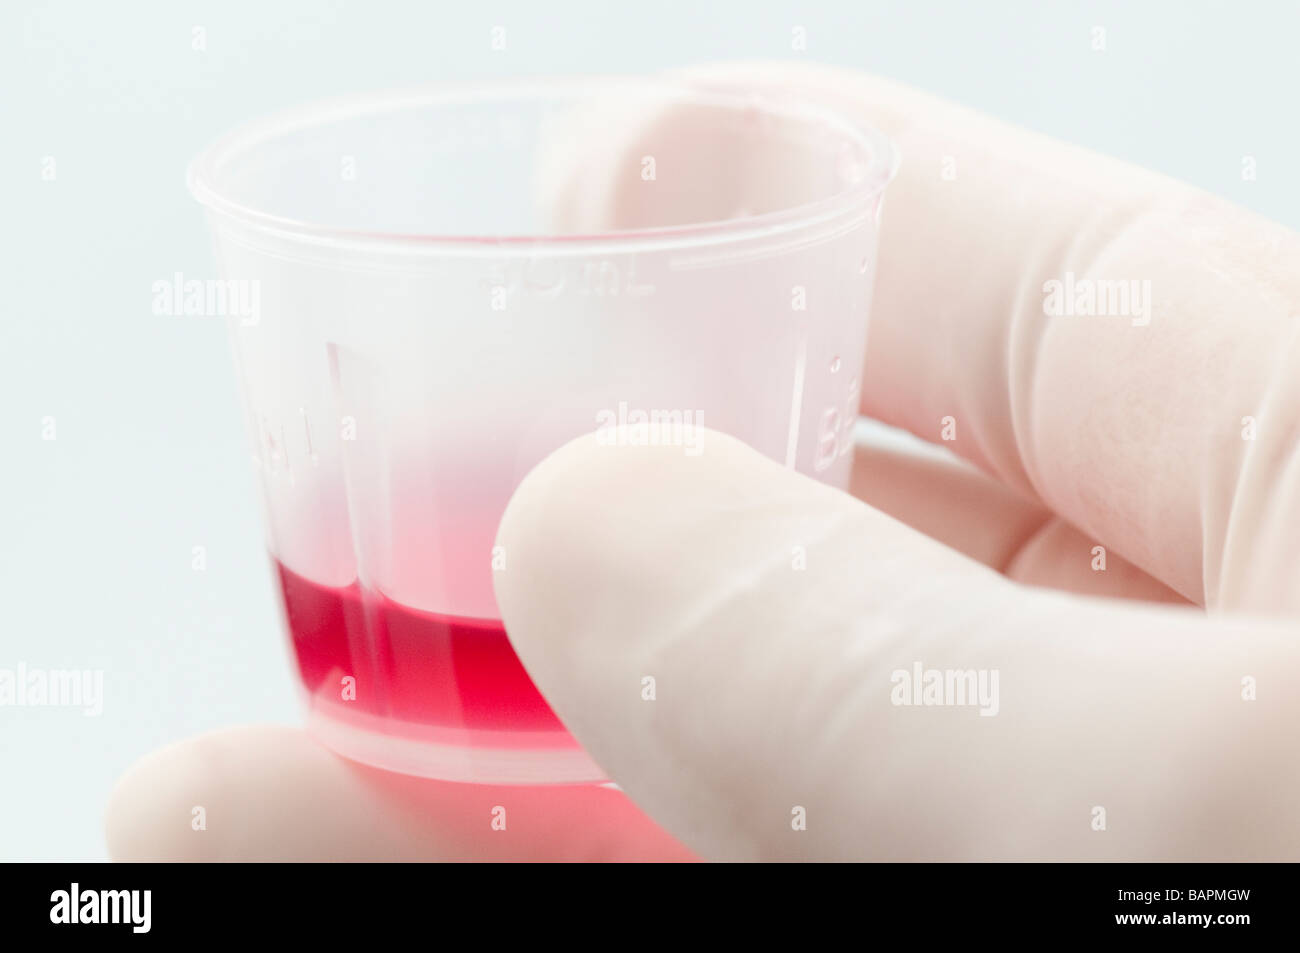 Hand wearing medical latex glove holding cough syrup in measuring cup Stock Photo